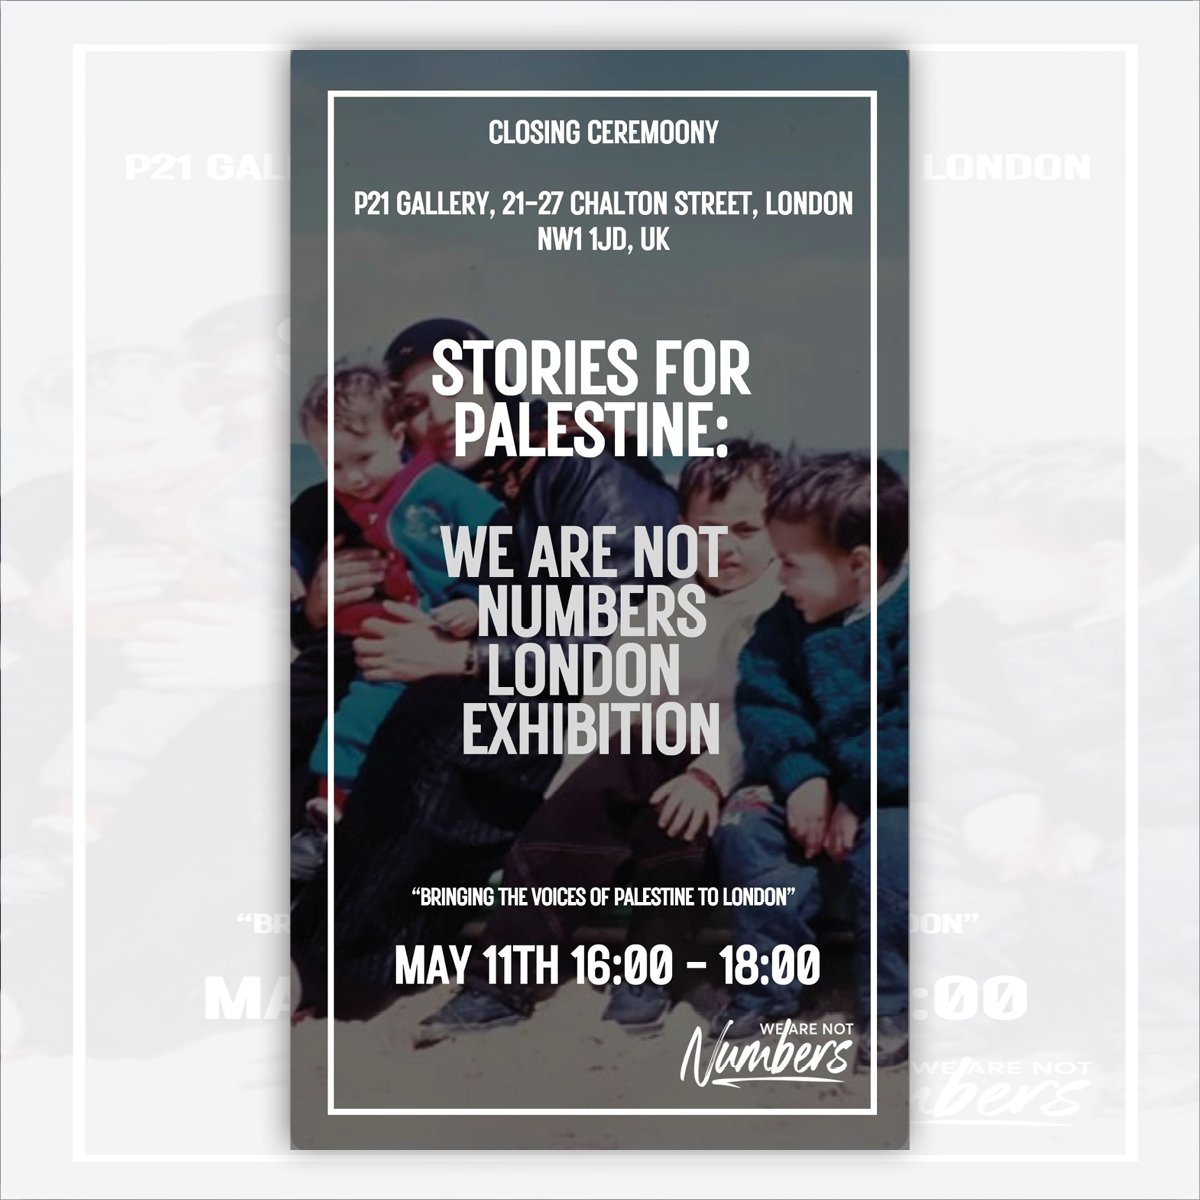 Stories for Palestine: We Are Not Numbers Closing Ceremony Exhibition P21 Gallery proudly invites you to Stories for Palestine, the closing ceremony of We Are Not Numbers first London exhibition. MORE INFO: p21.gallery/news/169 #palestine #freegaza #storytelling #art